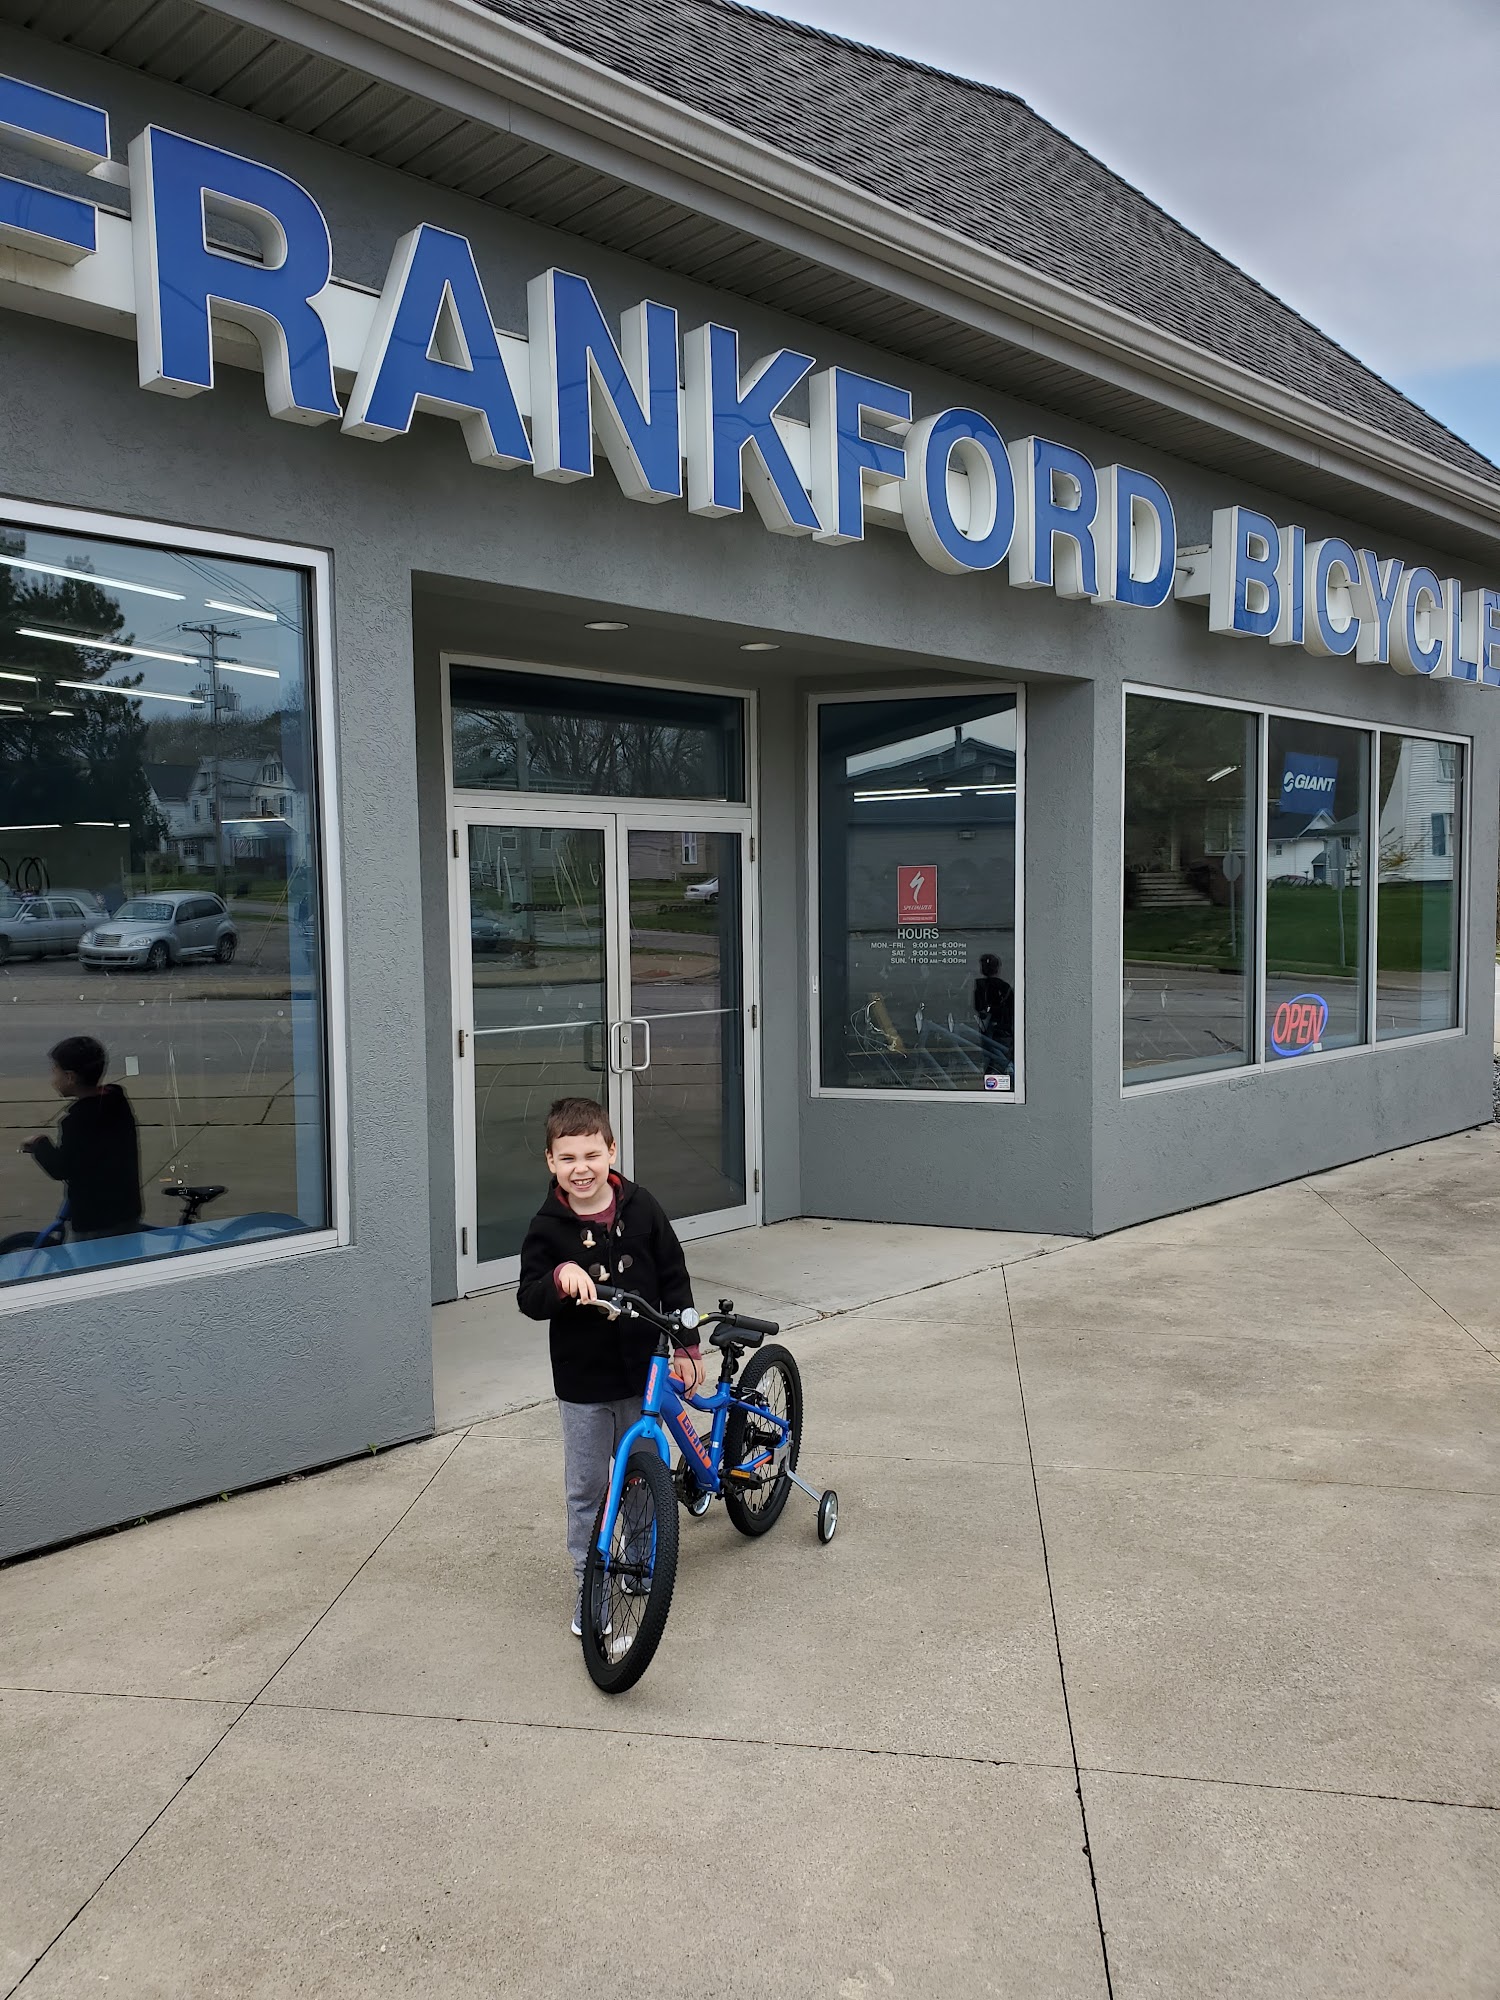 Frankford Bicycle Inc